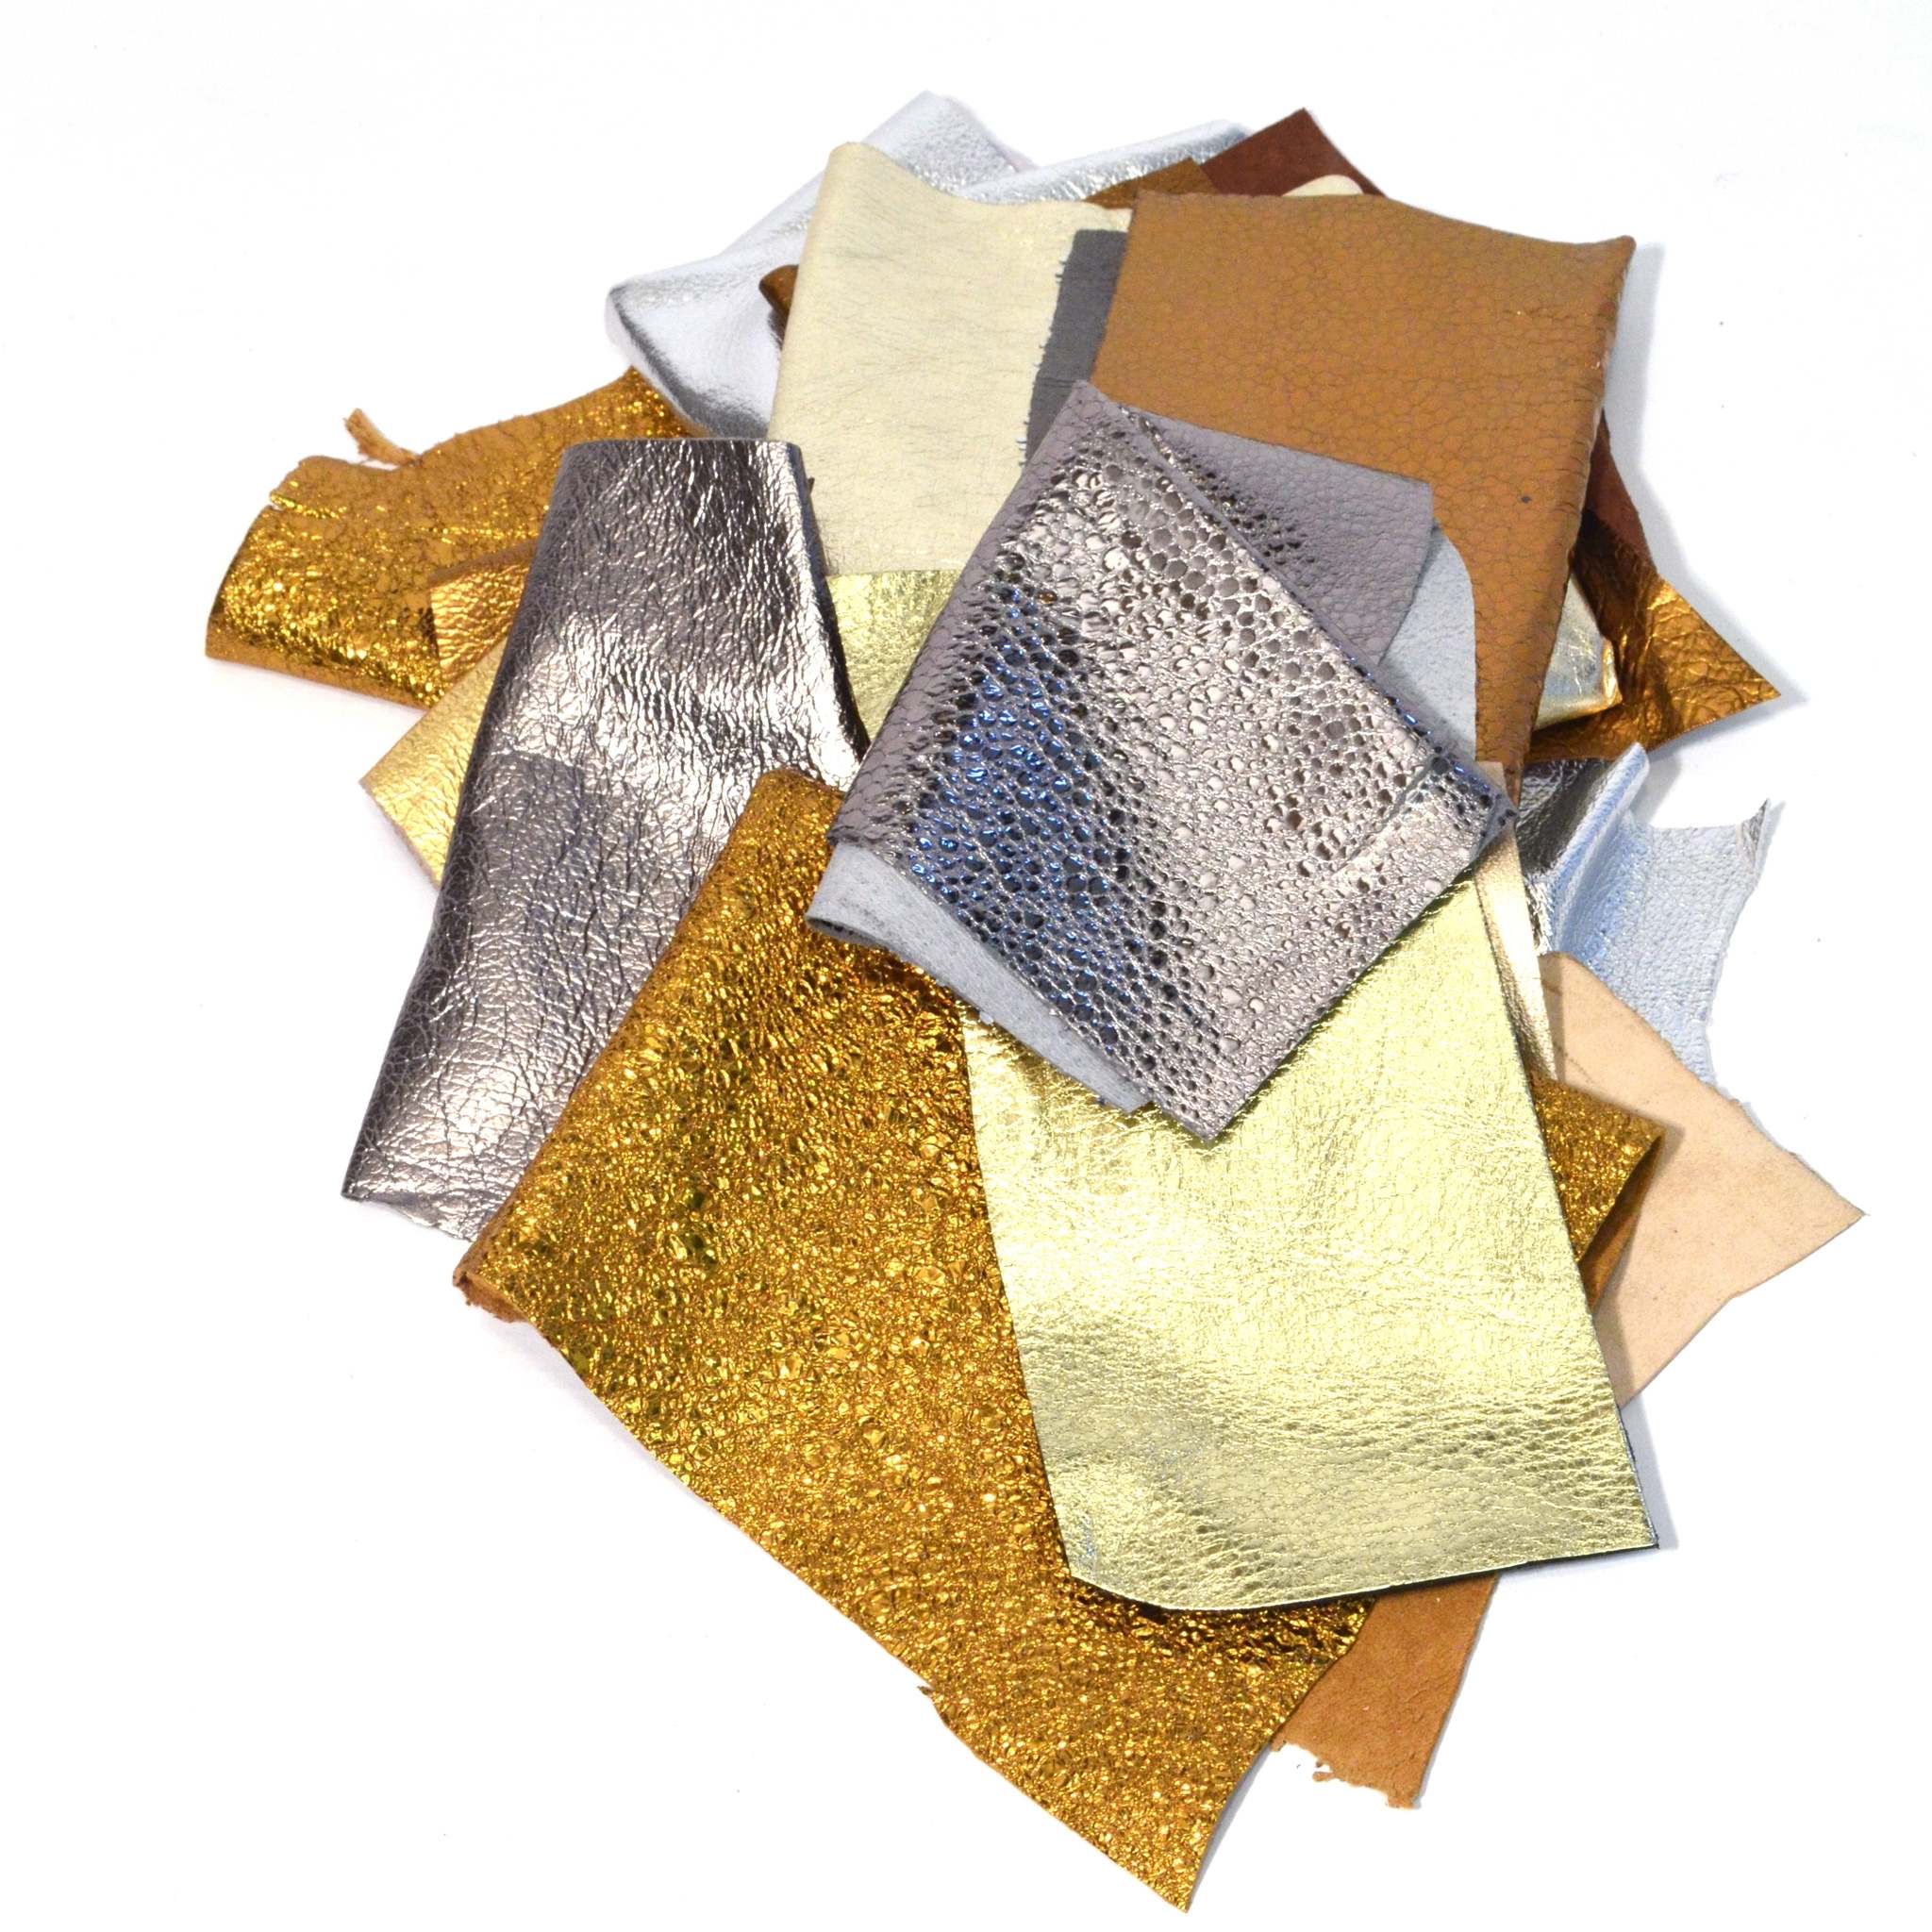 250g Bag of assorted metallic leather pieces ideal for tassells, appliques and other craft